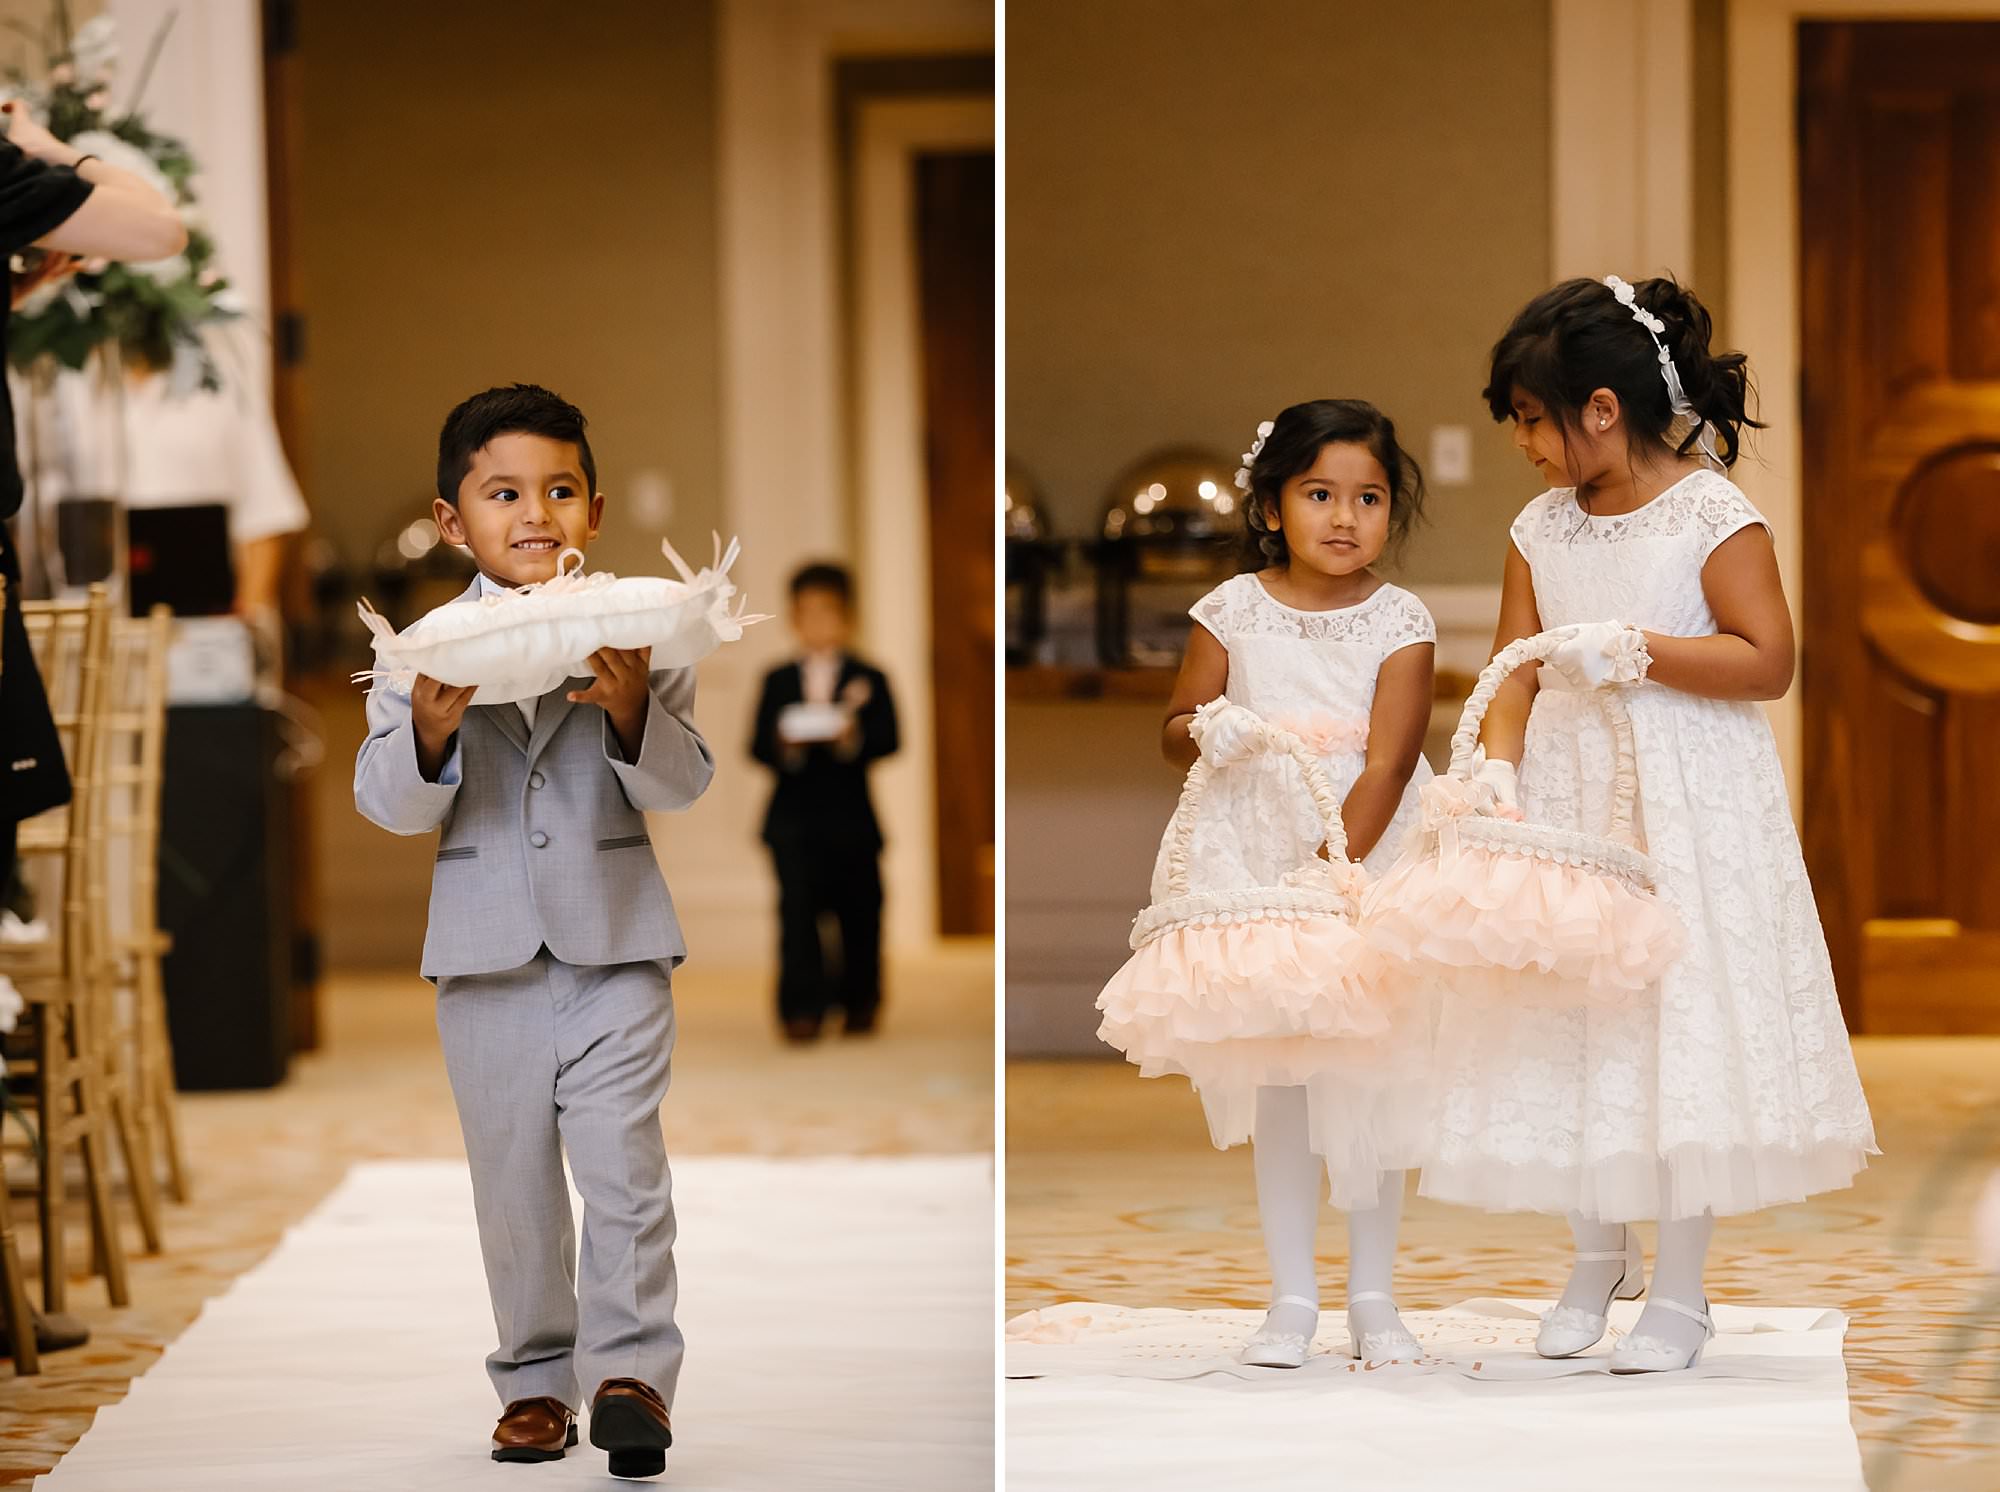 Ring bearers and flower girls walking down the aisle at their indoor wedding at Henderson Beach Resort and Spa